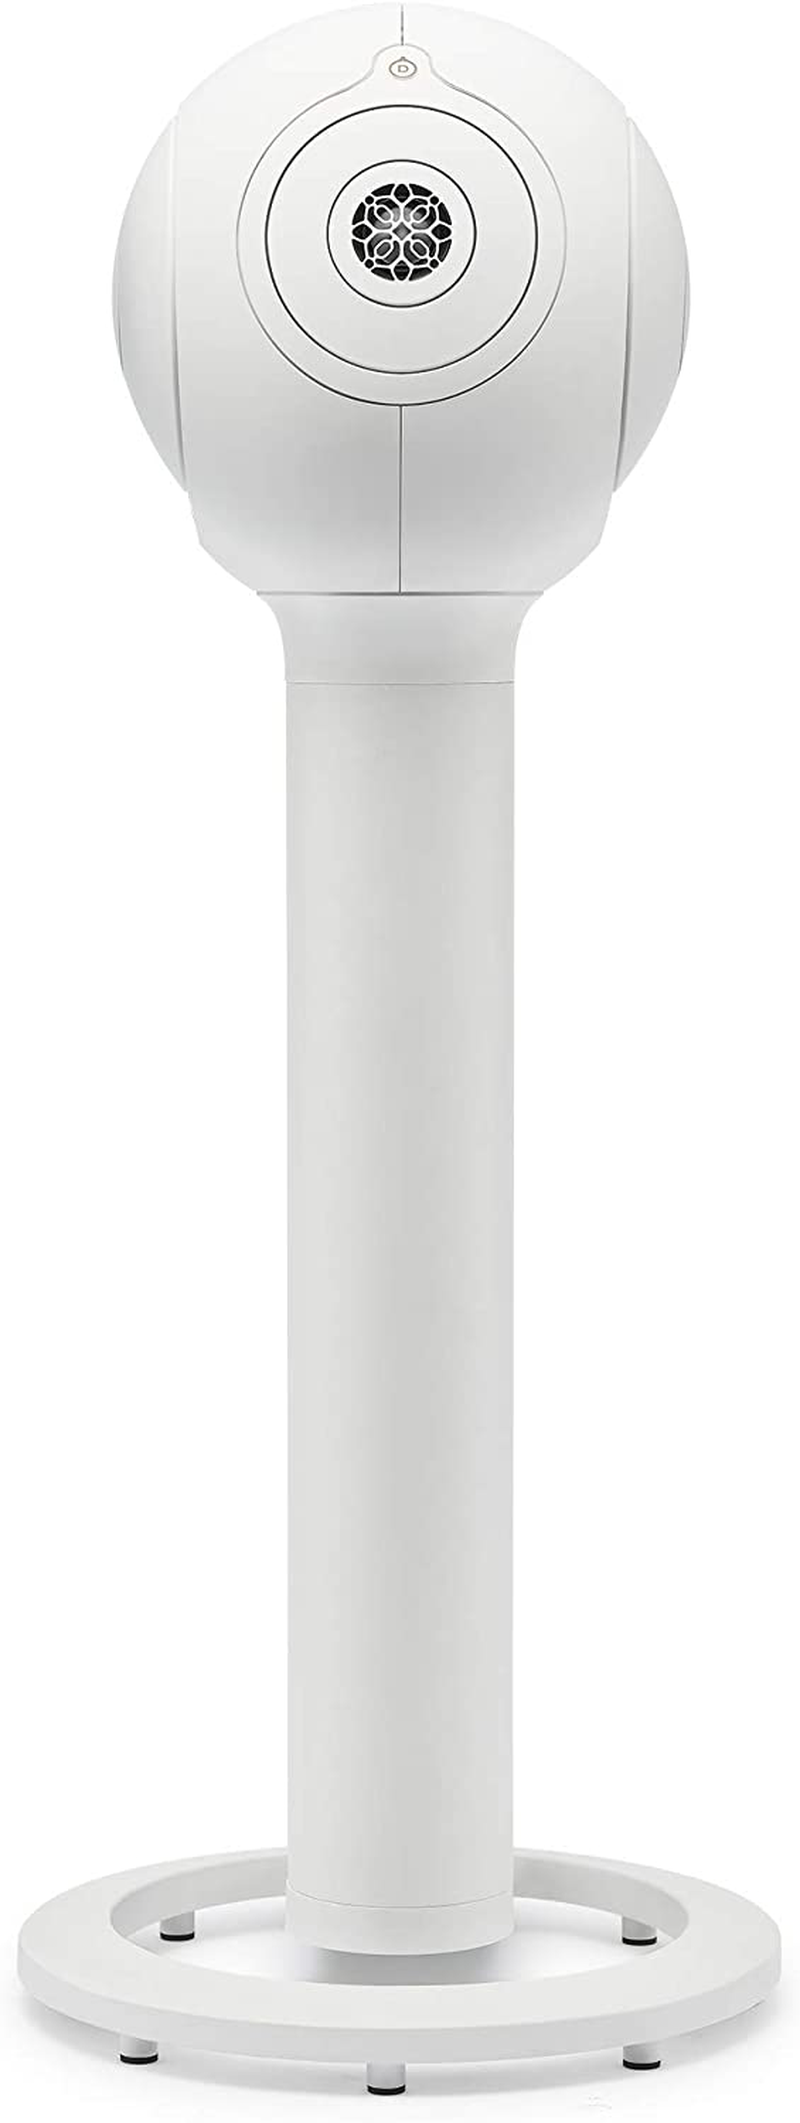 Devialet Tree Stand (Matte White) Home & Garden > Decor > Seasonal & Holiday Decorations > Christmas Tree Stands Devialet   